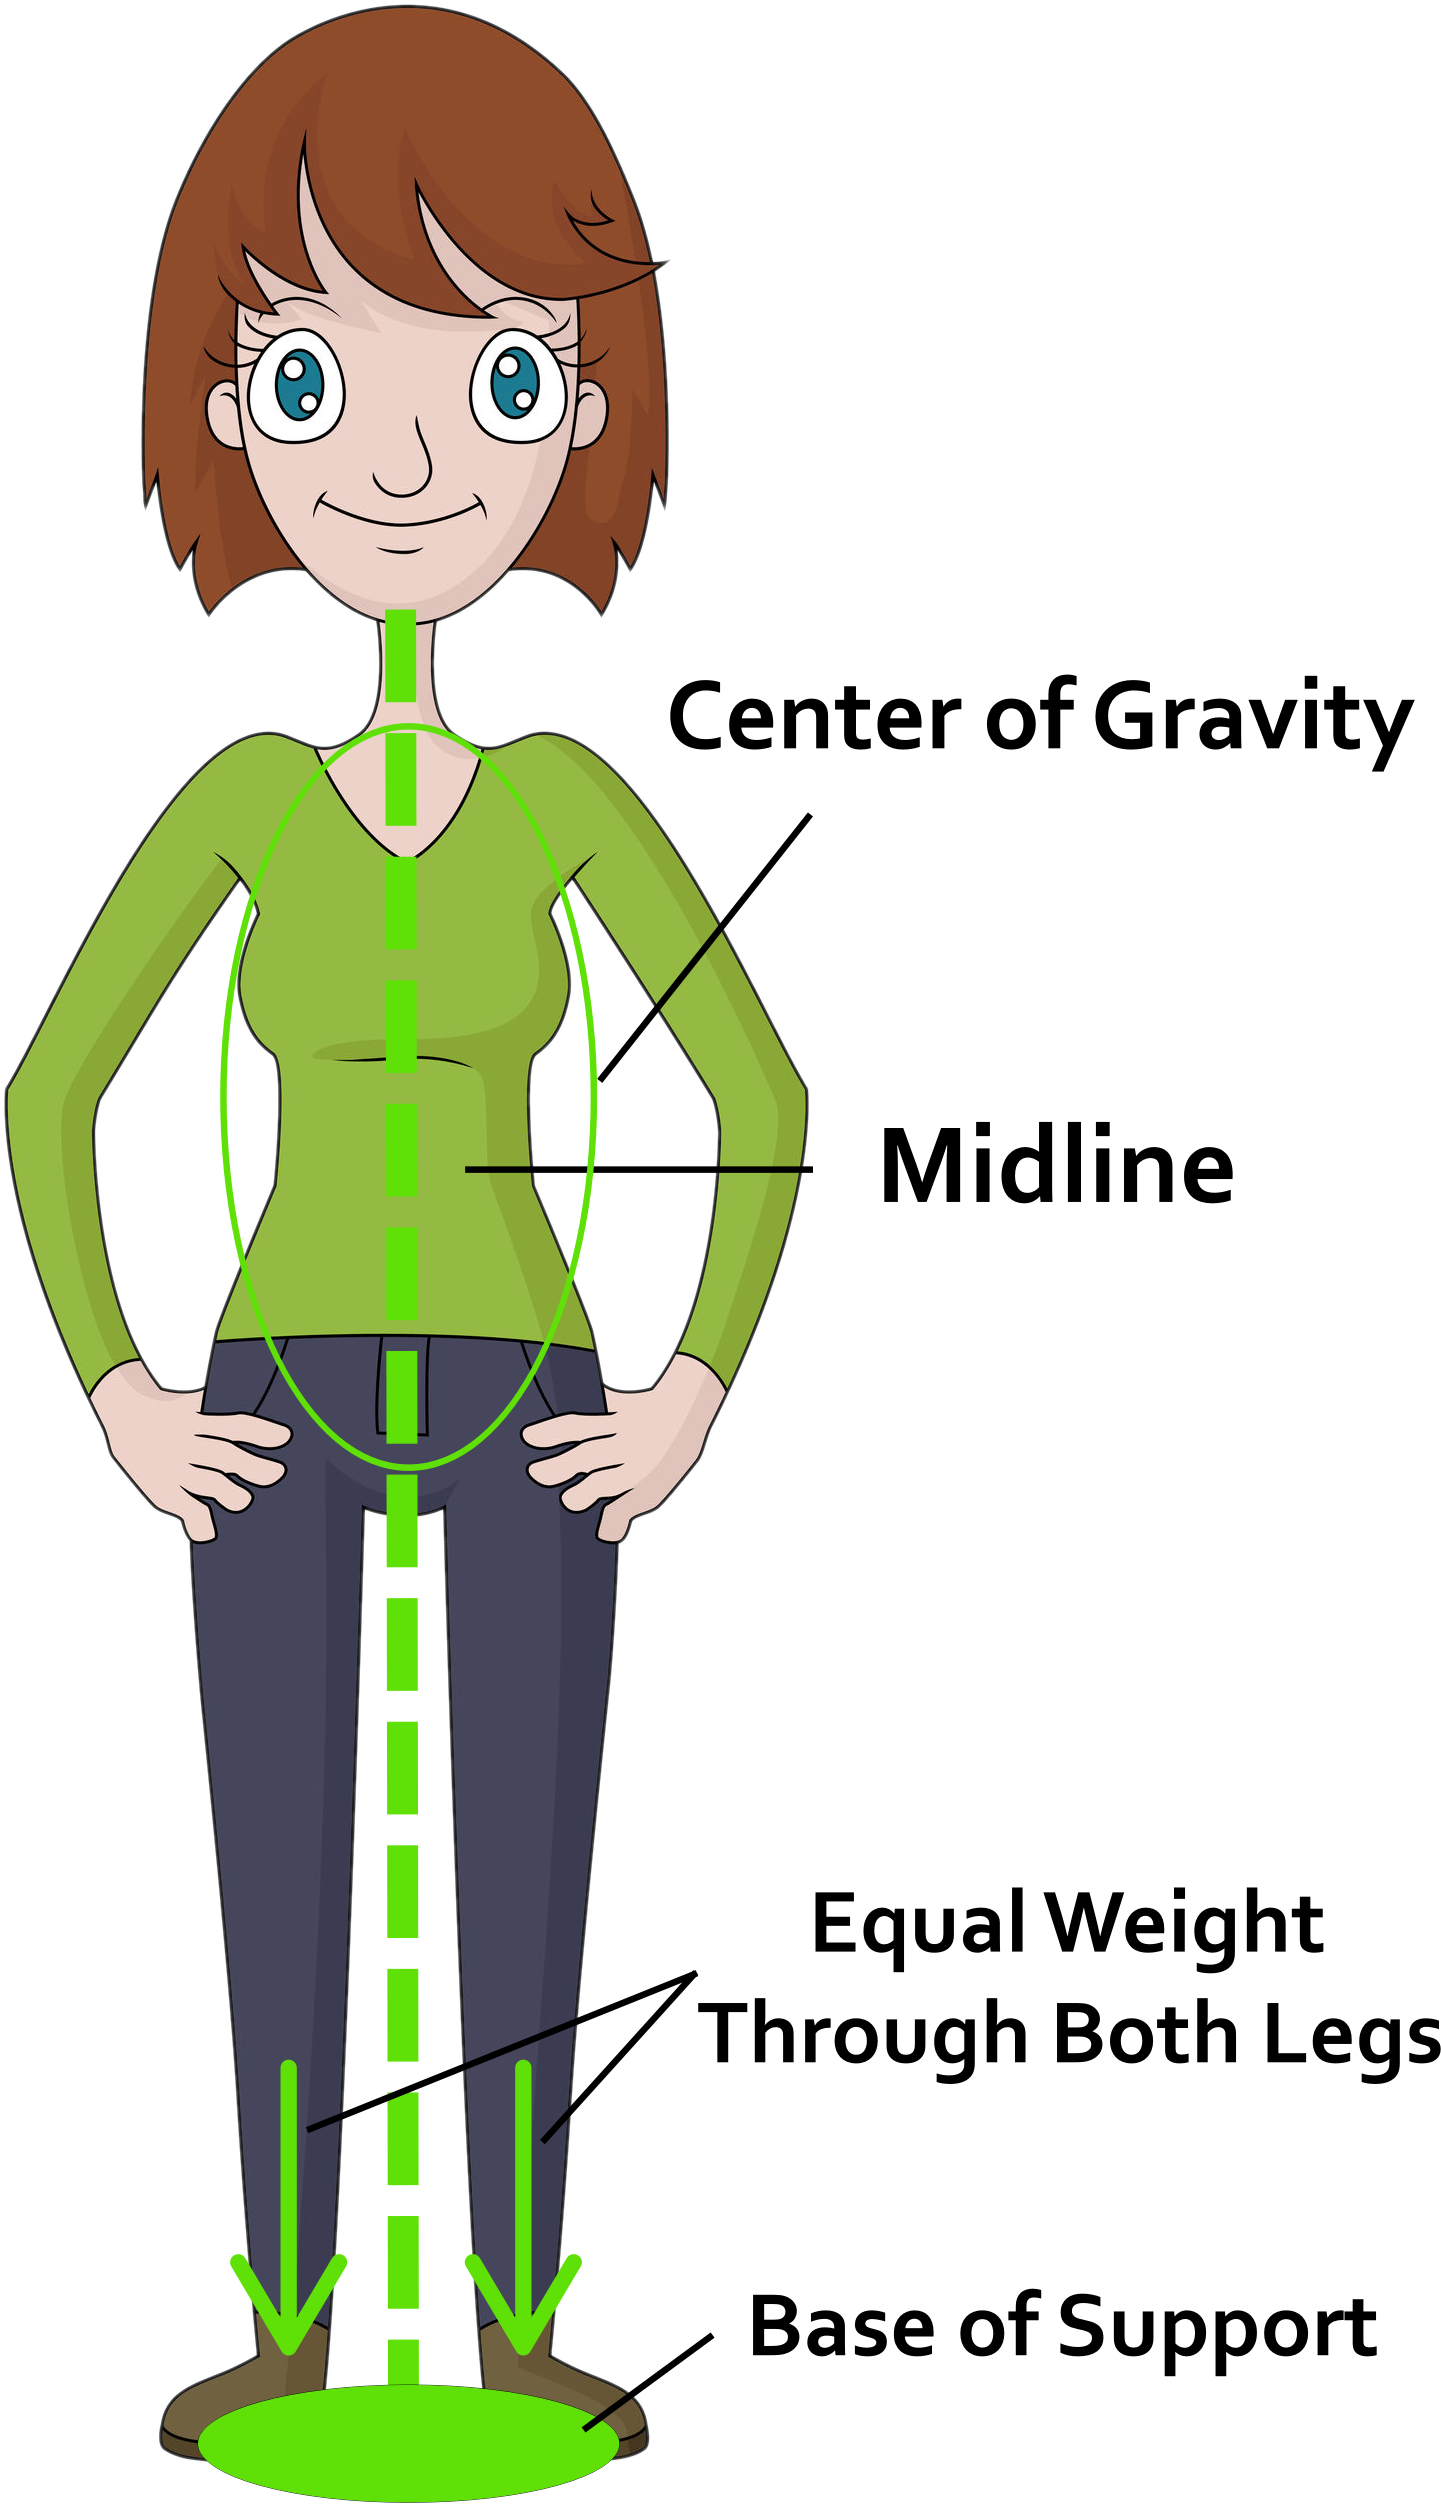 vector image of a female with balance symmetry